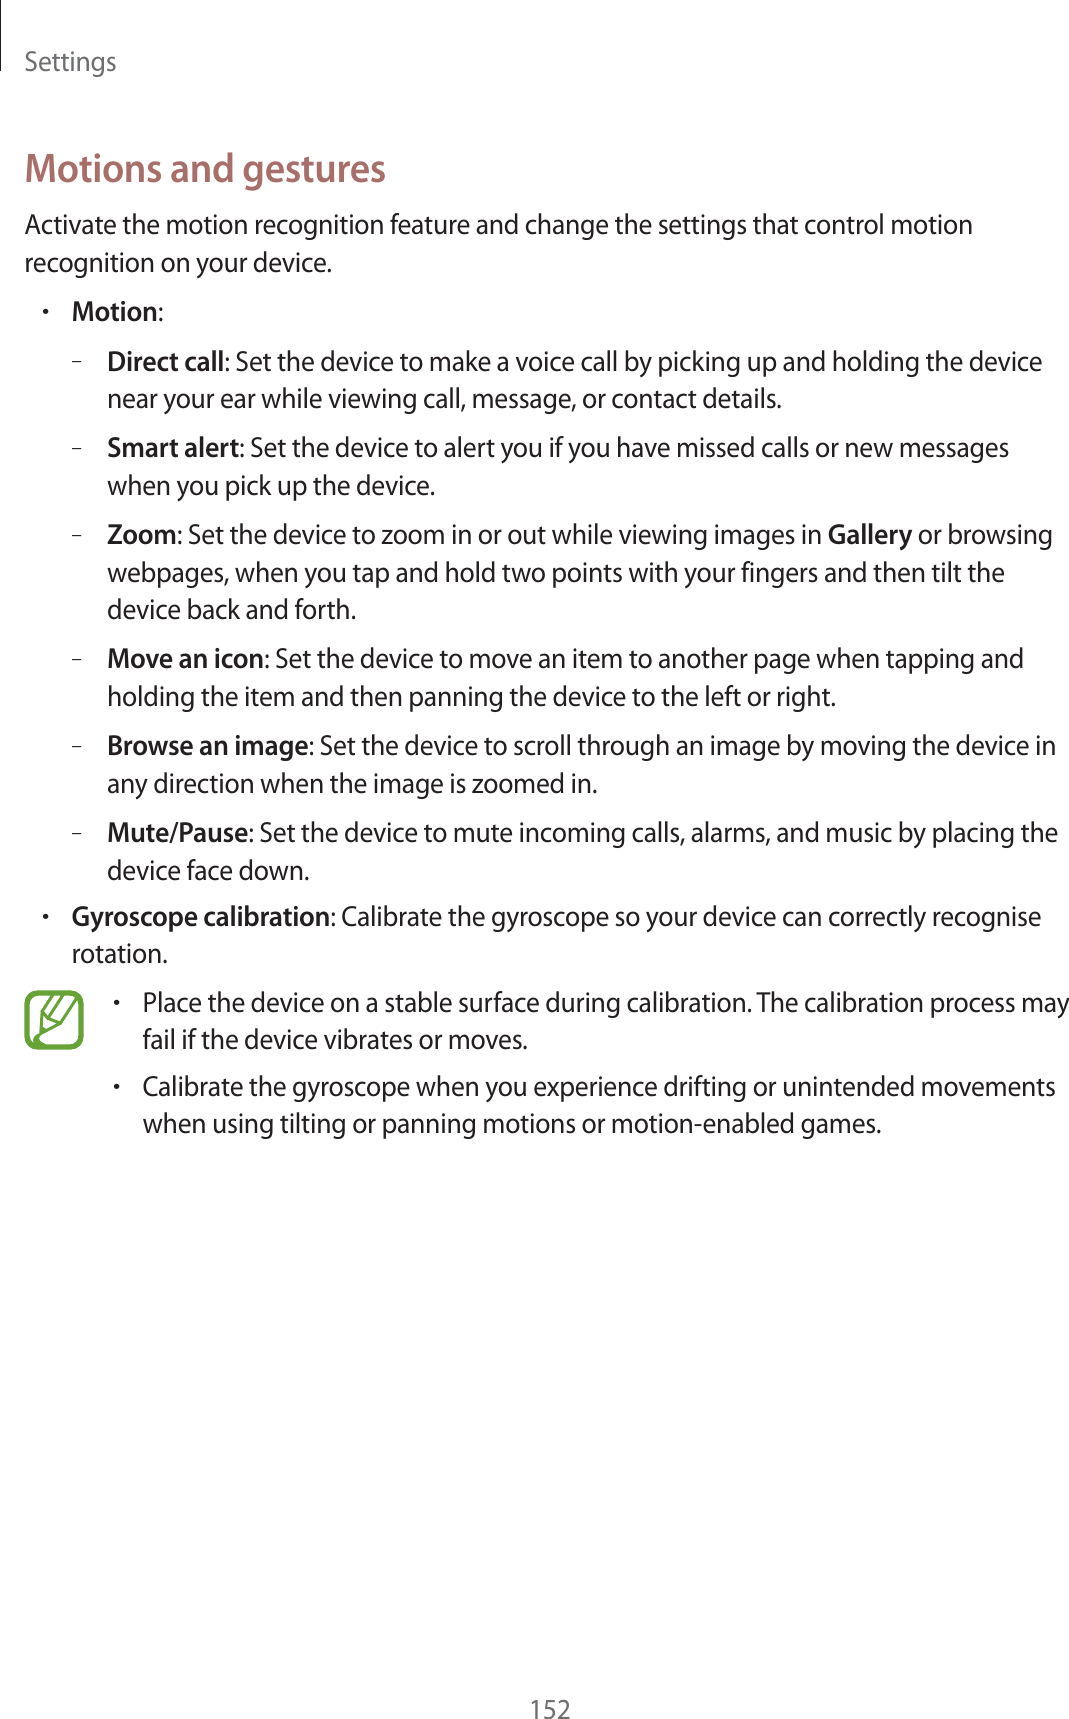 Settings152Motions and gesturesActivate the motion recognition feature and change the settings that control motion recognition on your device.rMotion:–Direct call: Set the device to make a voice call by picking up and holding the device near your ear while viewing call, message, or contact details.–Smart alert: Set the device to alert you if you have missed calls or new messages when you pick up the device.–Zoom: Set the device to zoom in or out while viewing images in Gallery or browsing webpages, when you tap and hold two points with your fingers and then tilt the device back and forth.–Move an icon: Set the device to move an item to another page when tapping and holding the item and then panning the device to the left or right.–Browse an image: Set the device to scroll through an image by moving the device in any direction when the image is zoomed in.–Mute/Pause: Set the device to mute incoming calls, alarms, and music by placing the device face down.rGyroscope calibration: Calibrate the gyroscope so your device can correctly recognise rotation.rPlace the device on a stable surface during calibration. The calibration process may fail if the device vibrates or moves.rCalibrate the gyroscope when you experience drifting or unintended movements when using tilting or panning motions or motion-enabled games.